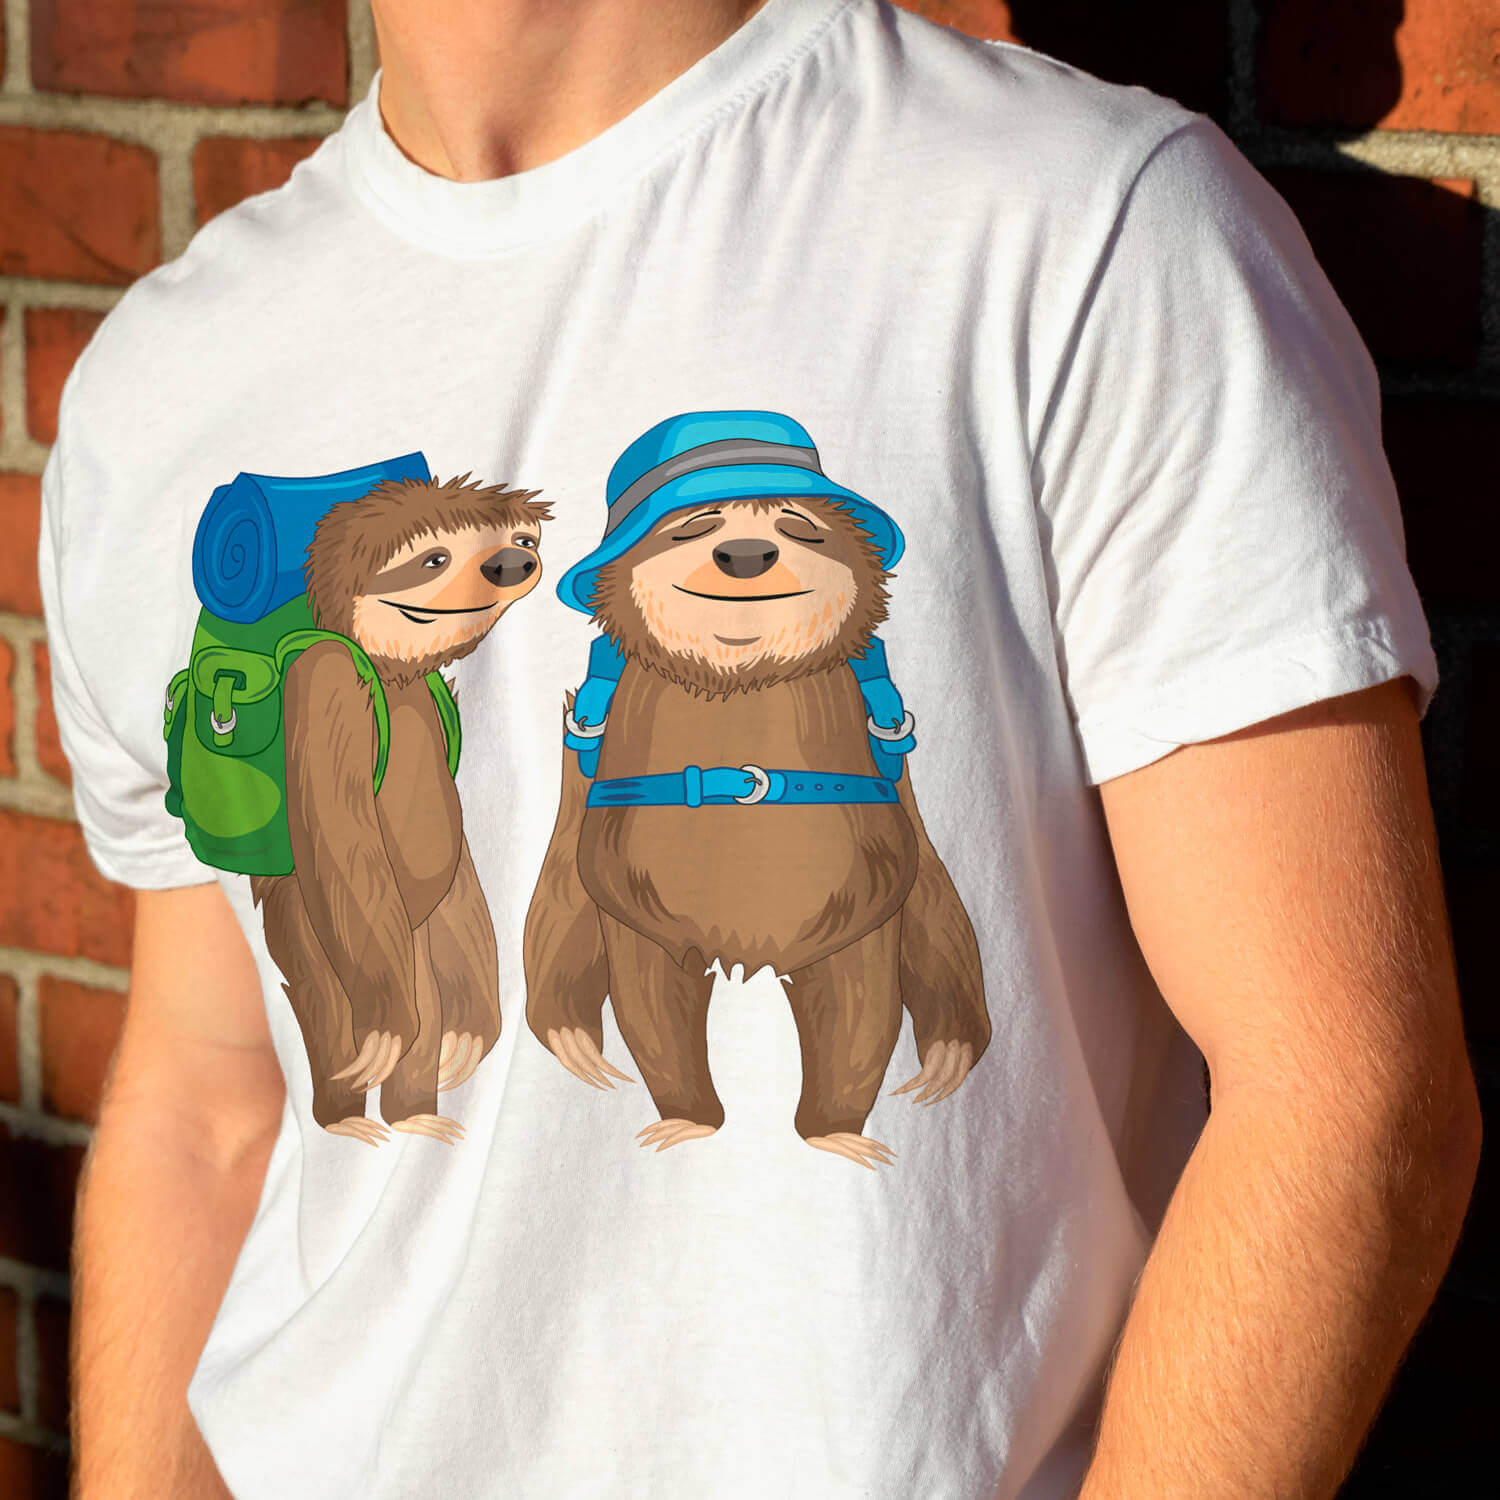 Man wearing a t - shirt with two slotty bears on it.